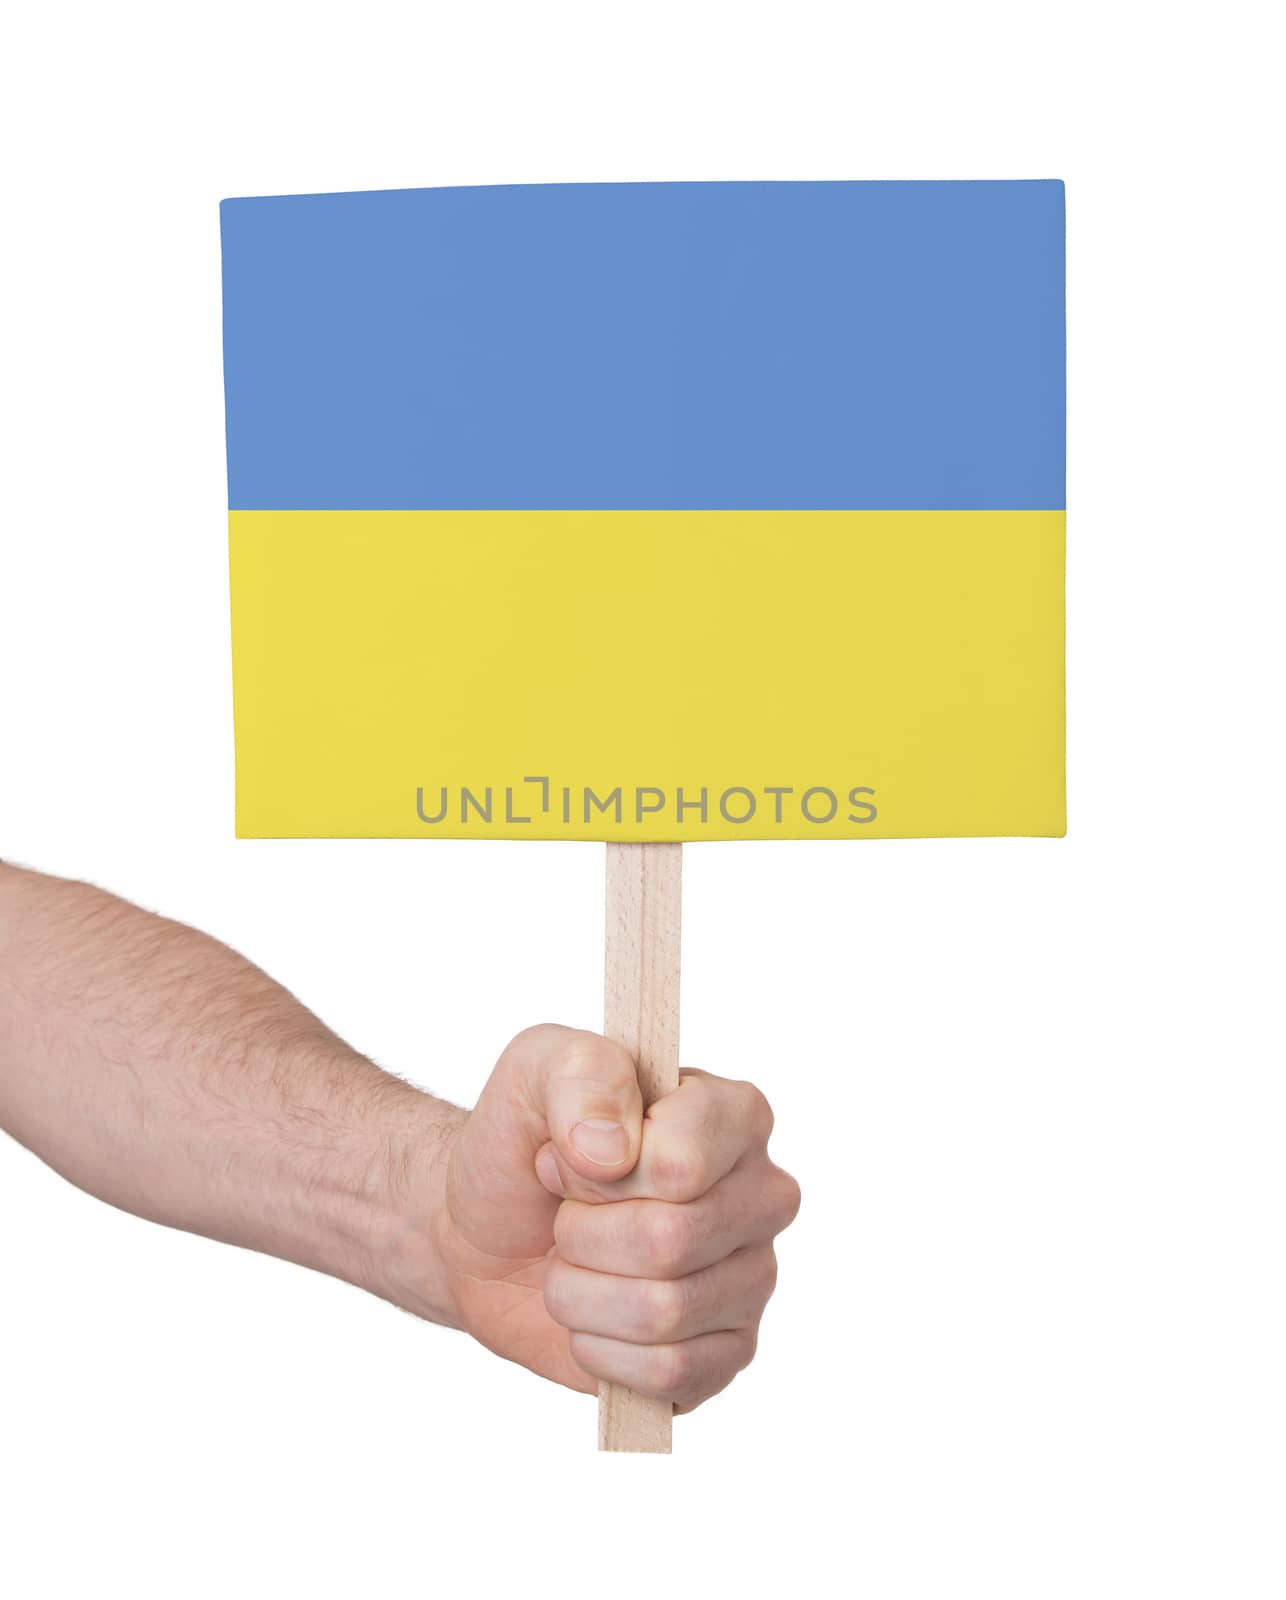 Hand holding small card, isolated on white - Flag of Ukraine